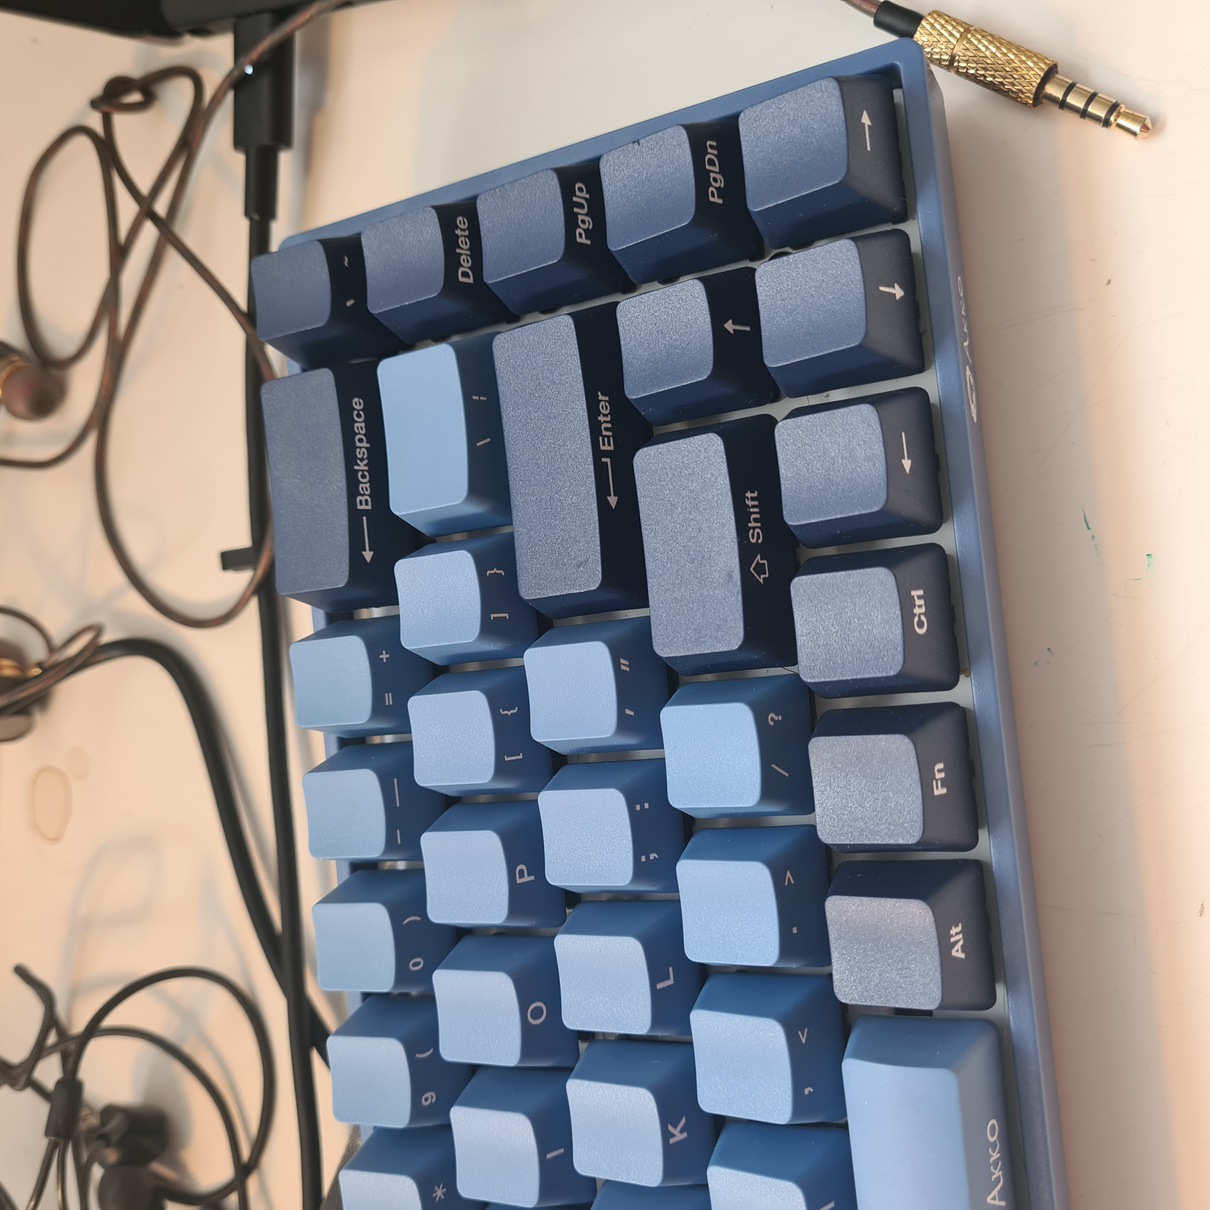 Part of my mechanical keyboard